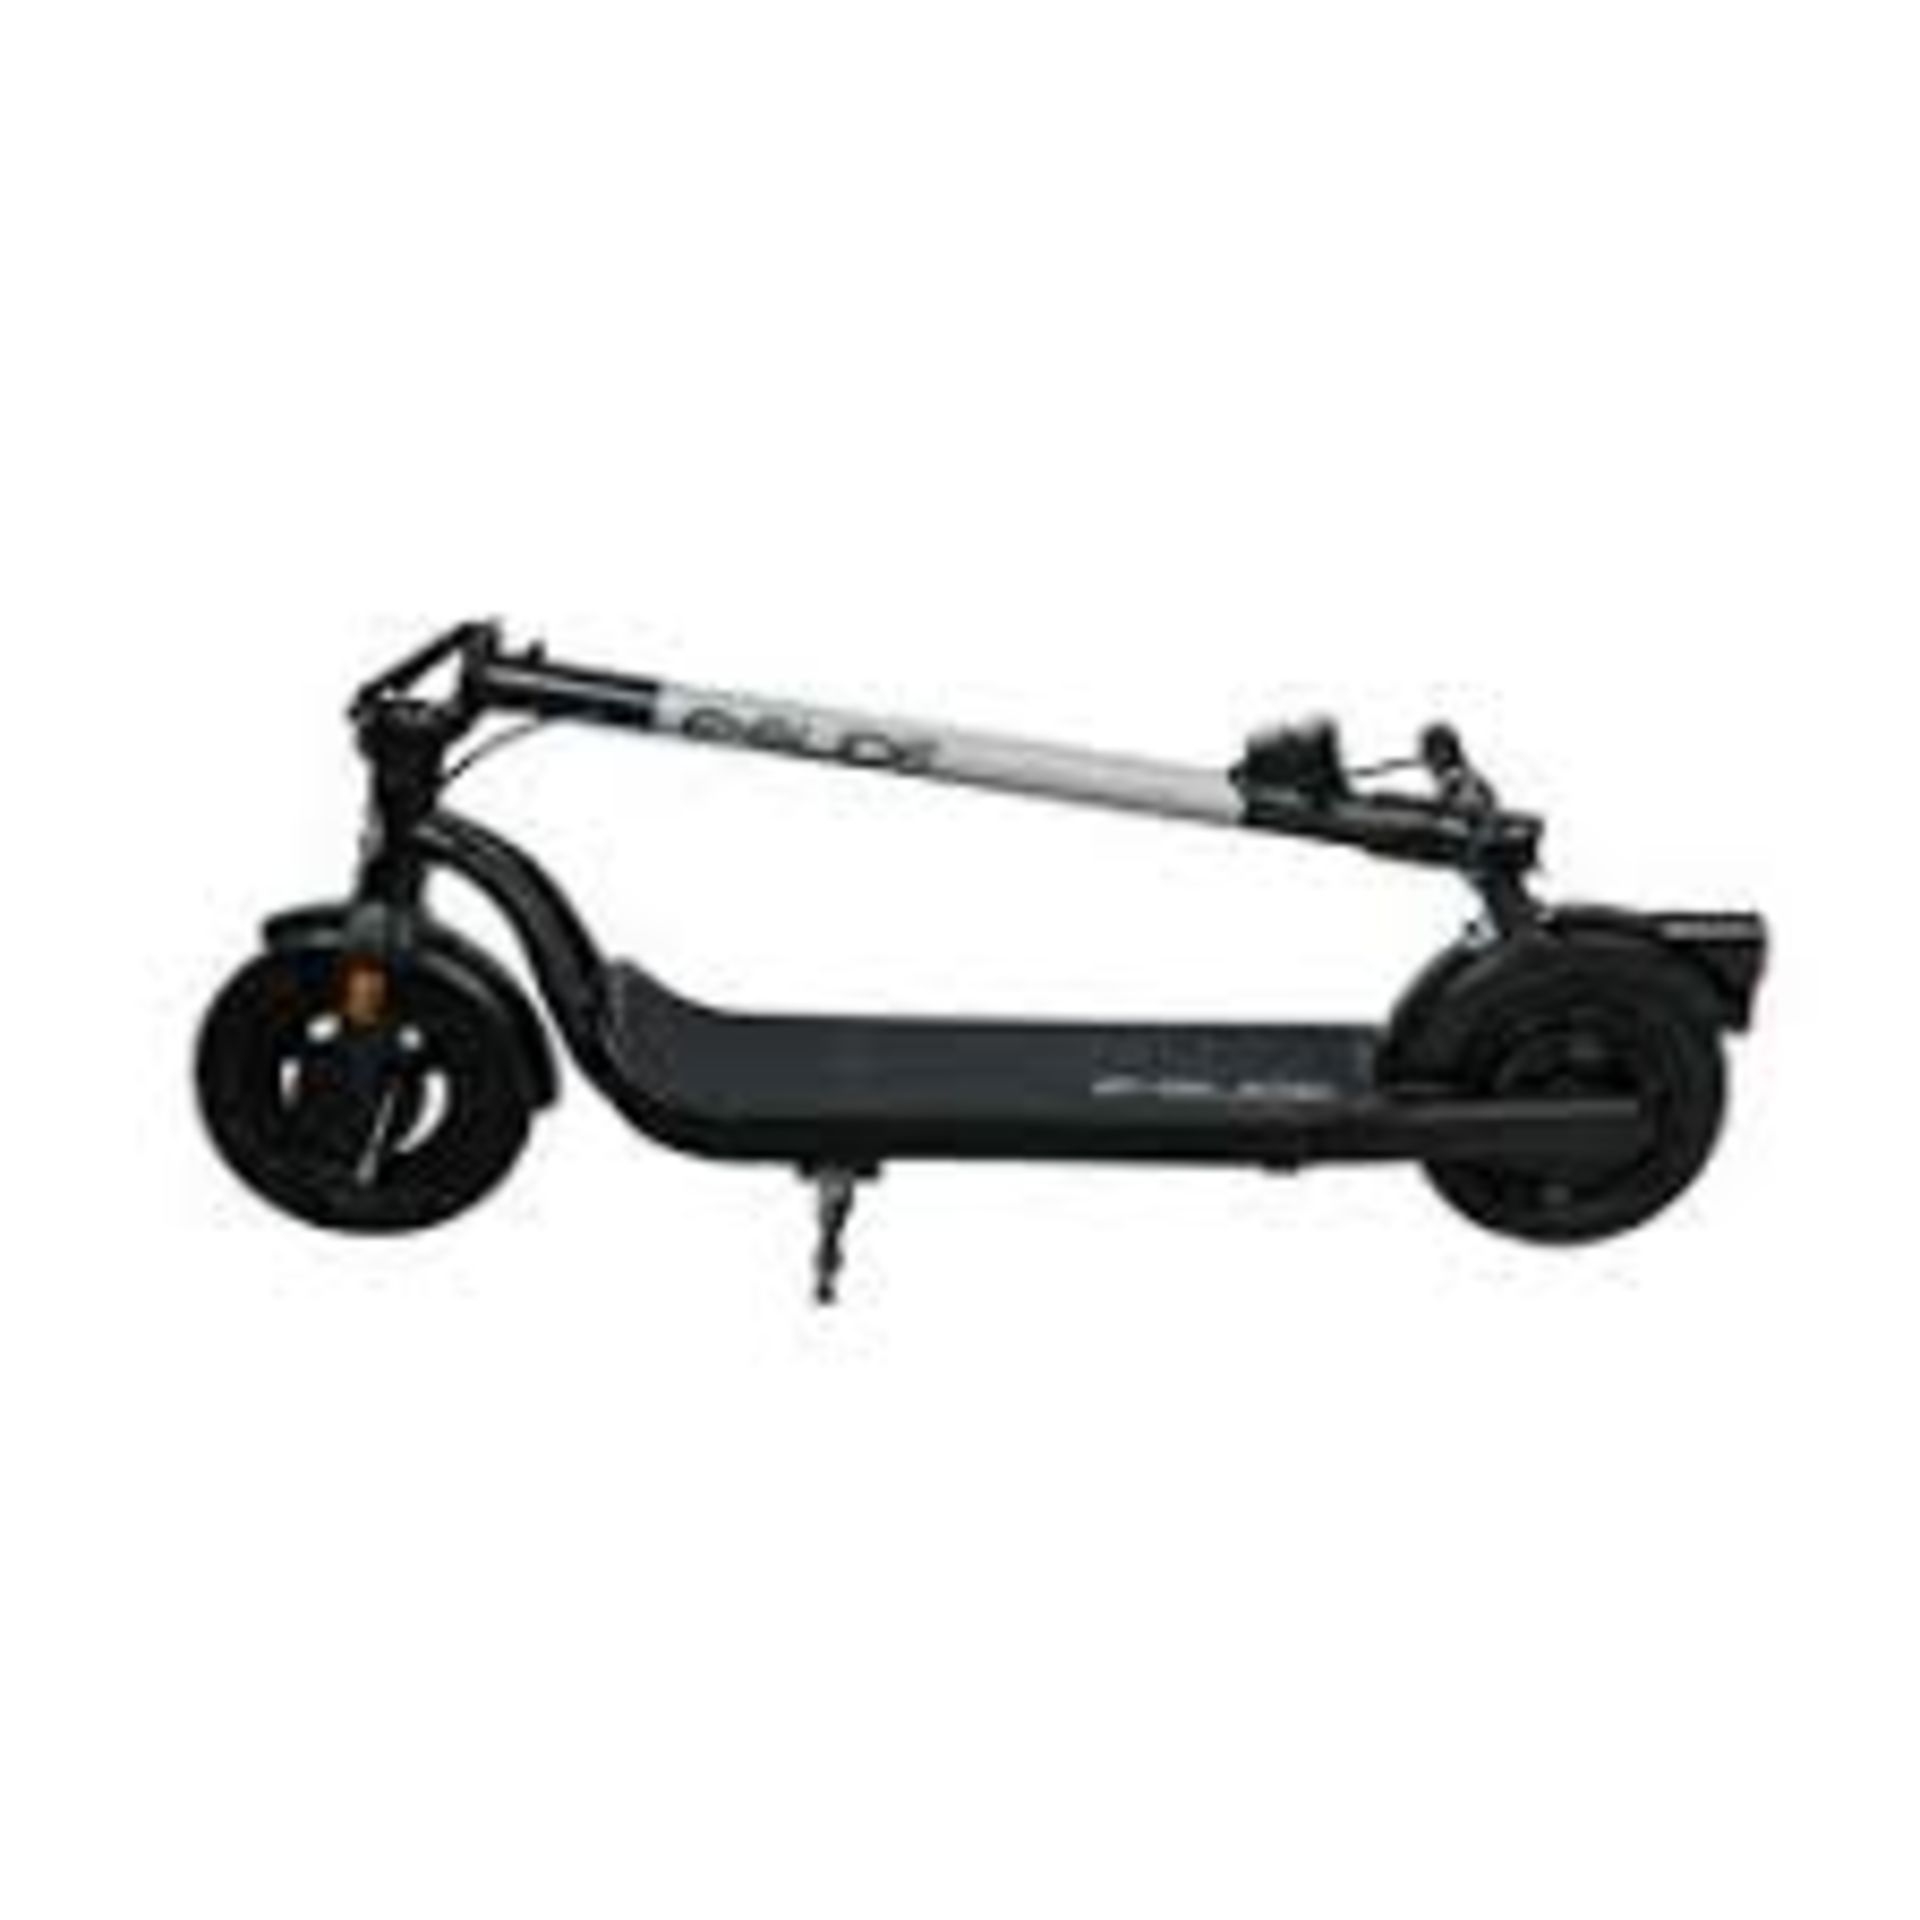 Brand New E-Glide V2 Electric Scooter Grey and Black RRP £599, Introducing a sleek and efficient - Image 2 of 2